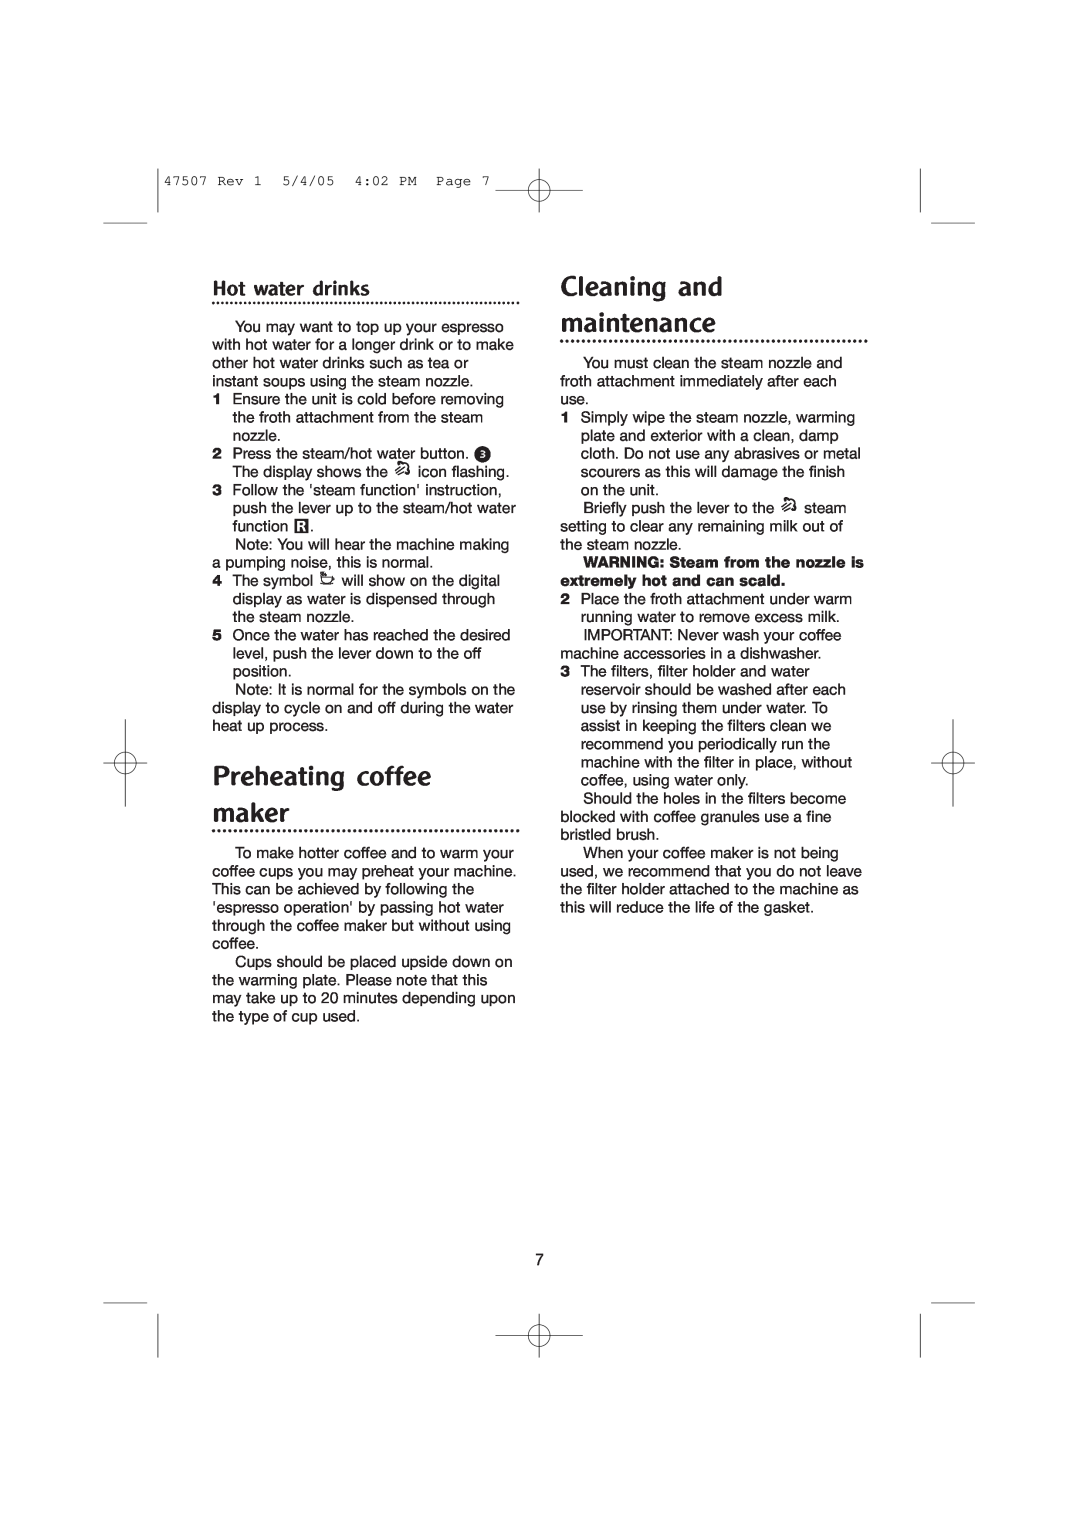 Morphy Richards CoffeMaker manual Preheating coffee maker, Cleaning and maintenance, Hot water drinks 